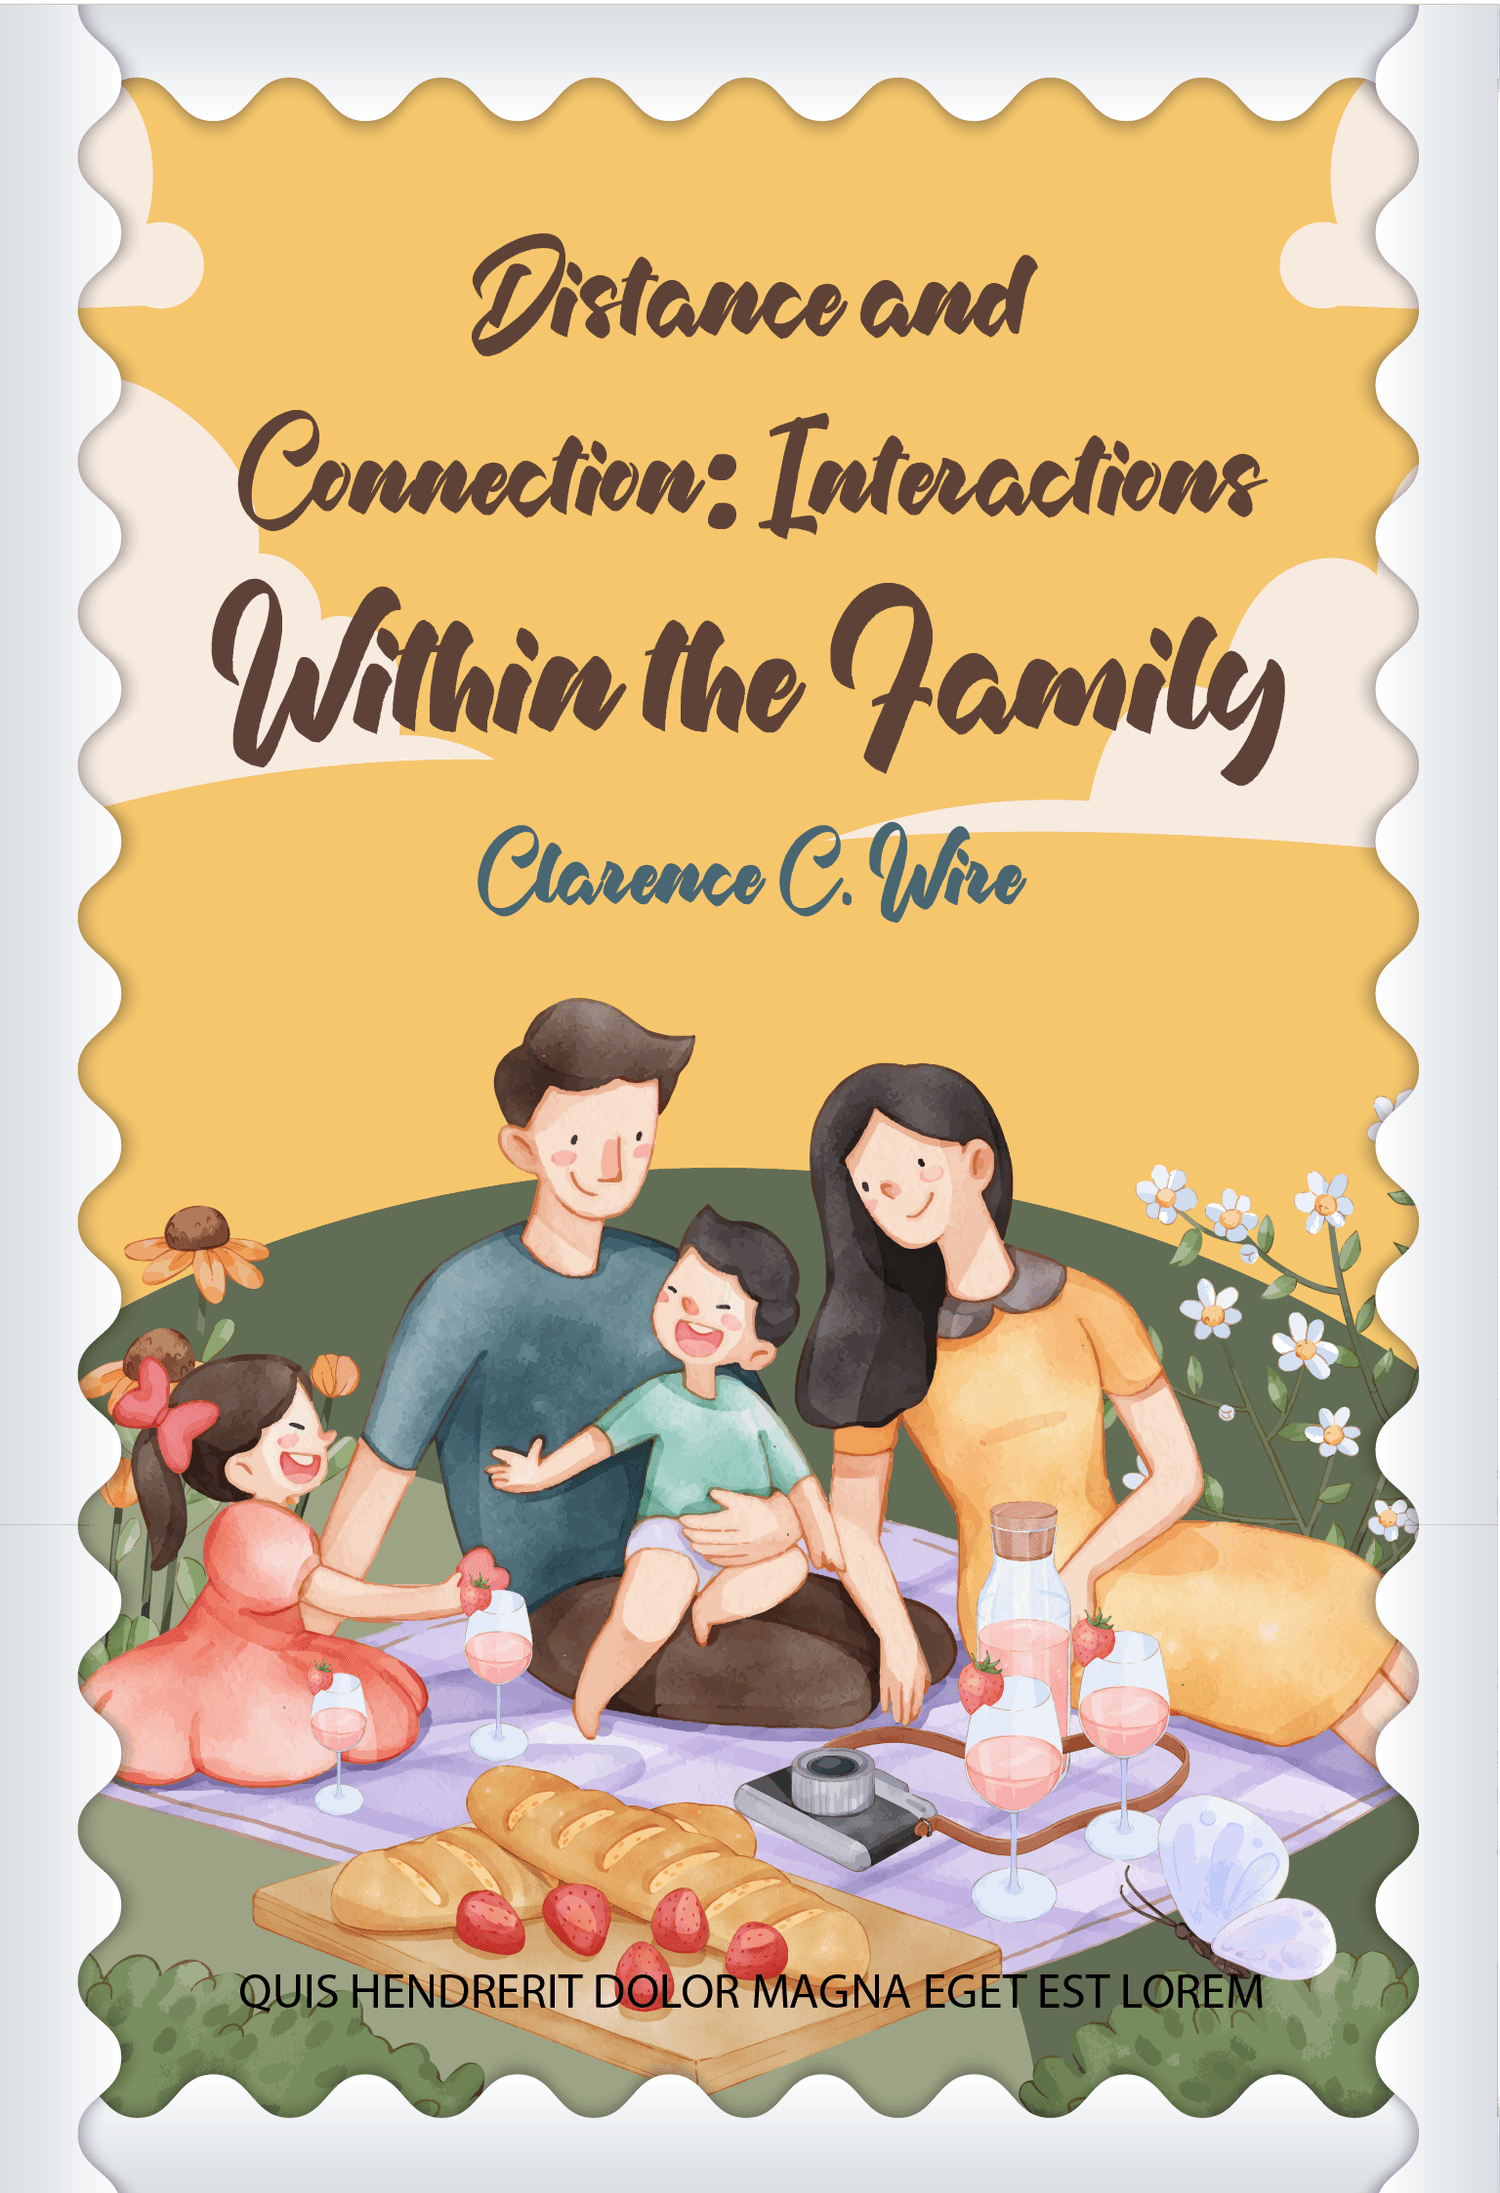 kid and family book cover template